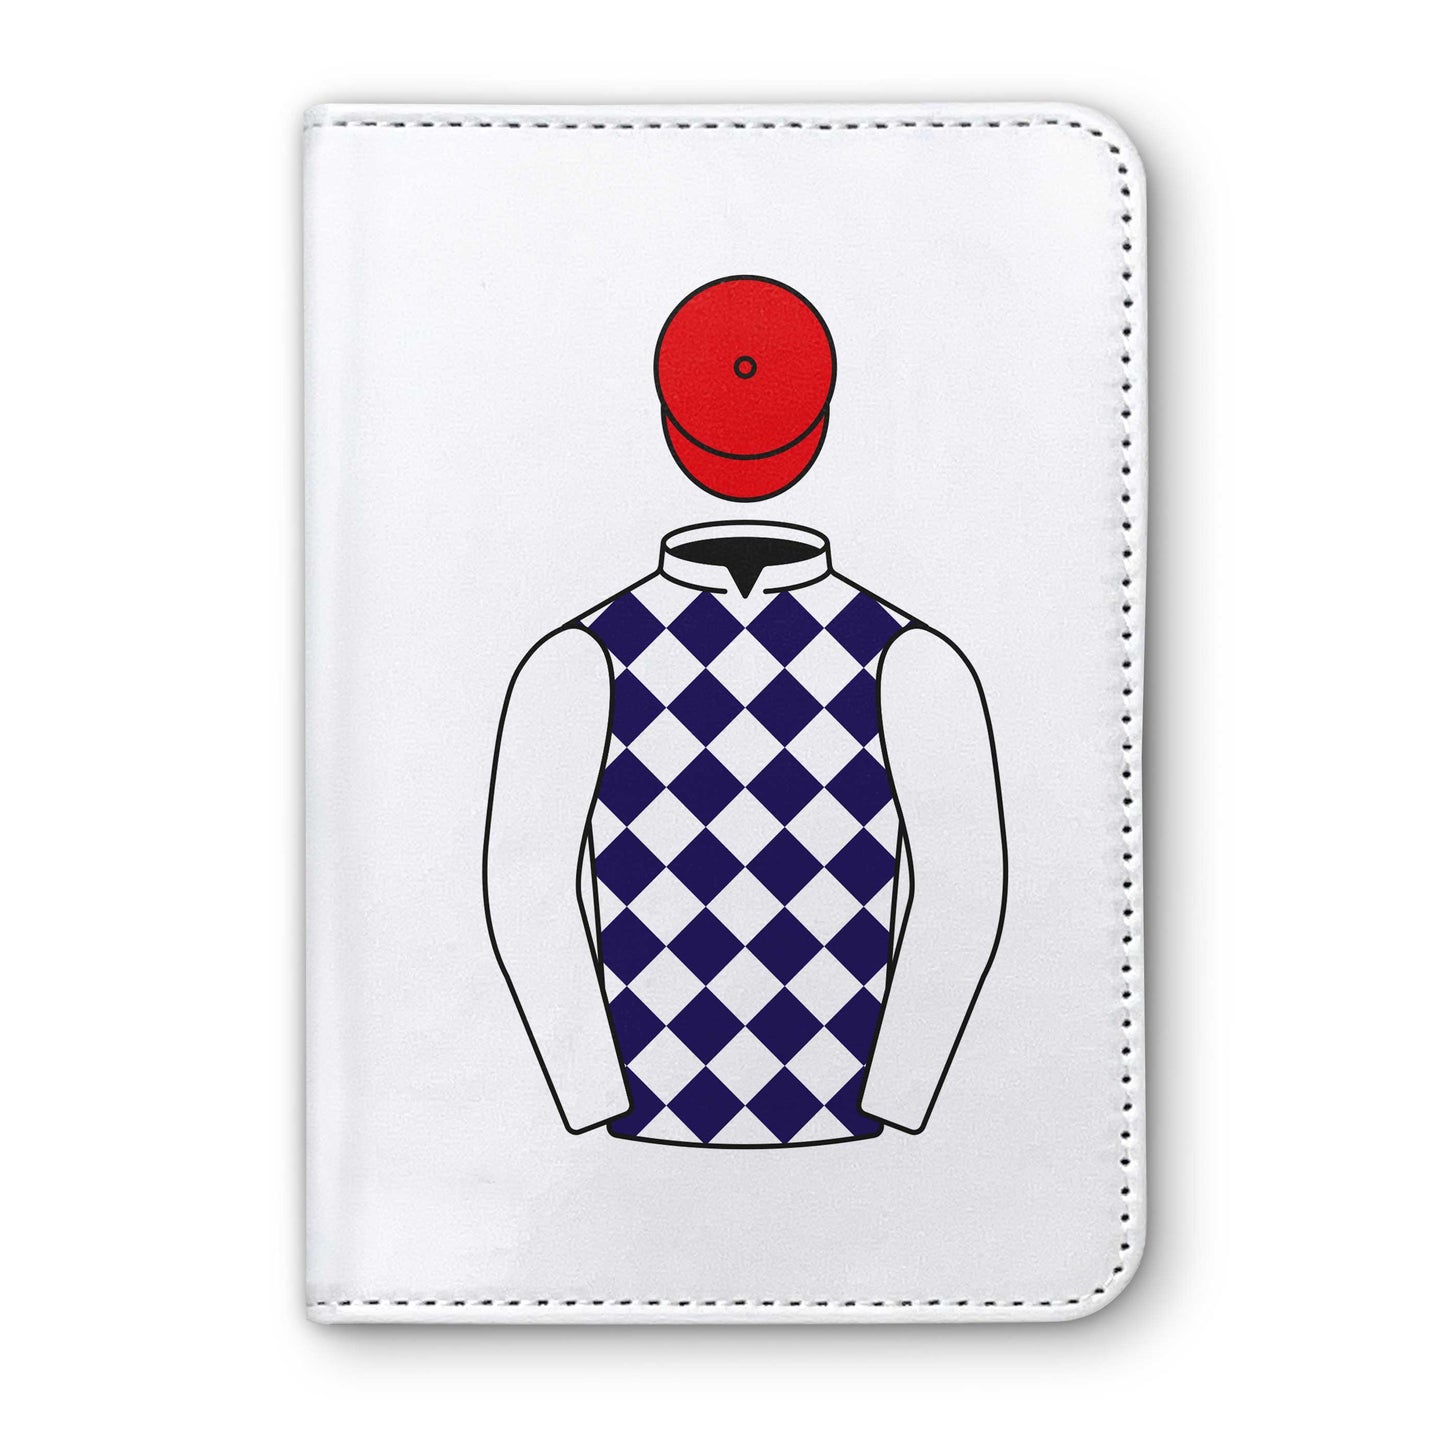 R A Bartlett Horse Racing Passport Holder - Hacked Up Horse Racing Gifts